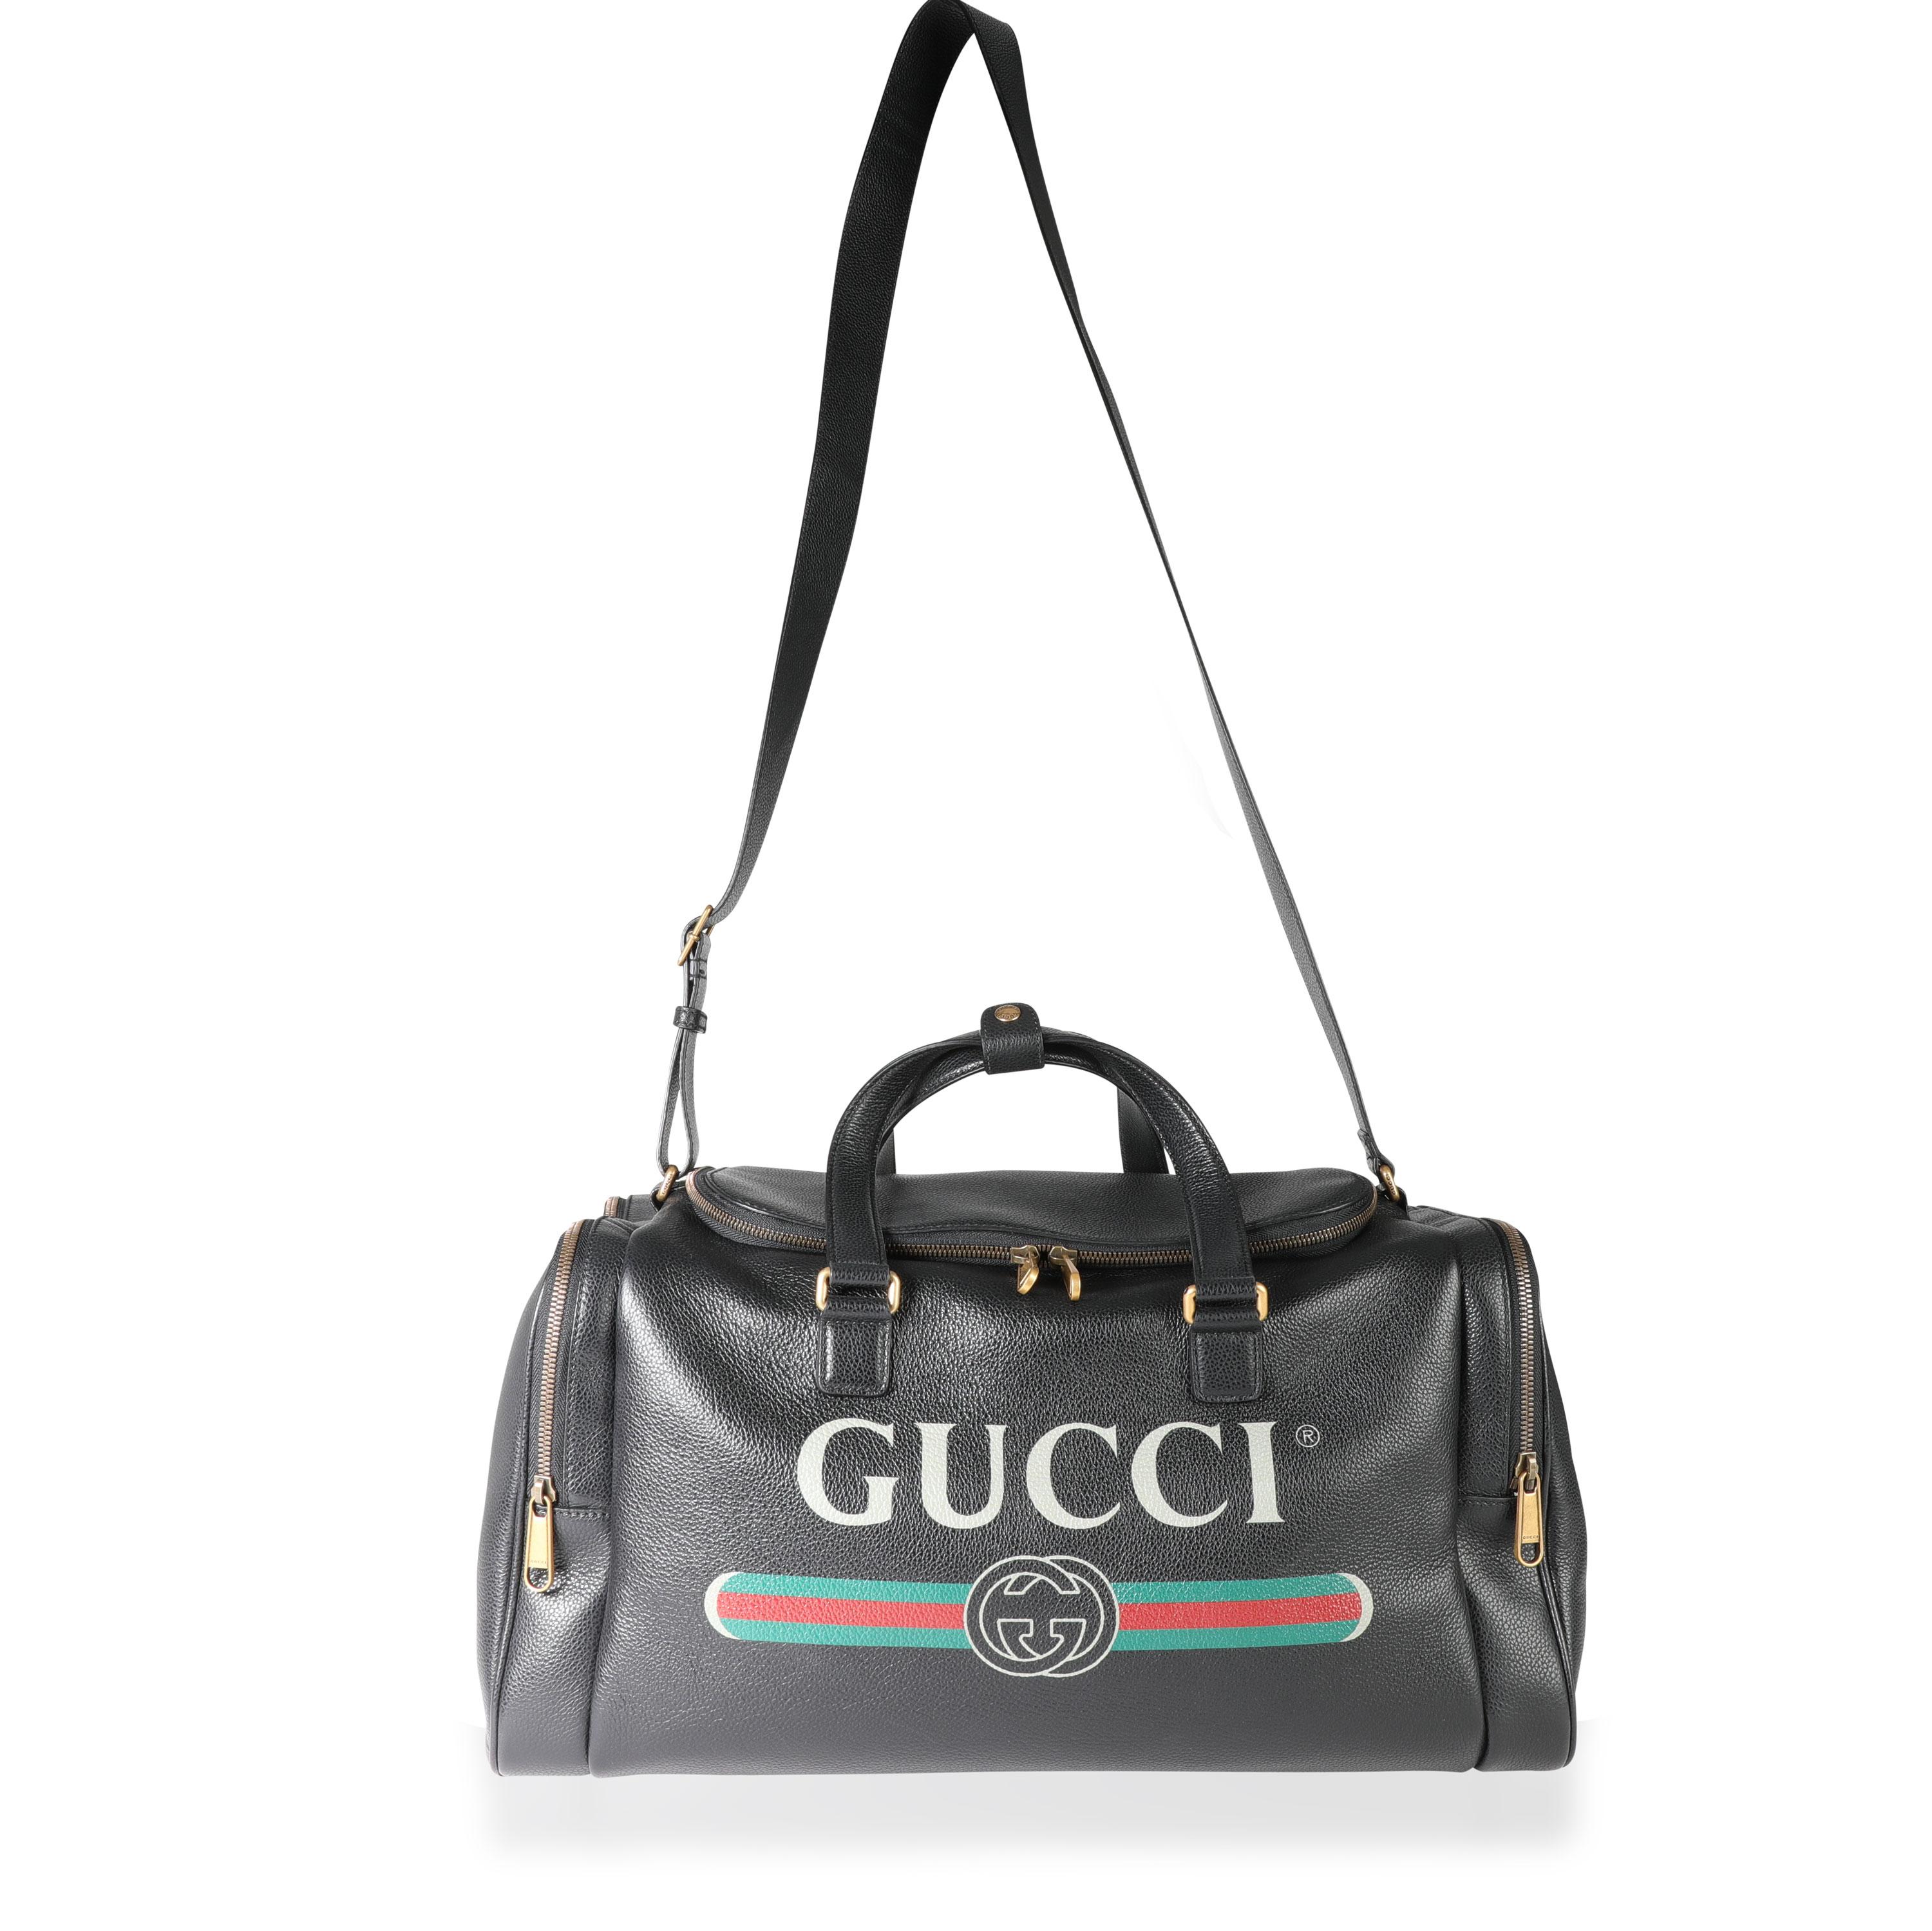 Gucci Black Grained Calfskin Logo Print Duffle Bag
SKU: 113636
MSRP: USD 2,490.00
Condition: Pre-owned (3000)
Condition Description: 
Handbag Condition: Excellent
Condition Comments: Excellent Condition. Faint marks to leather. No other visible